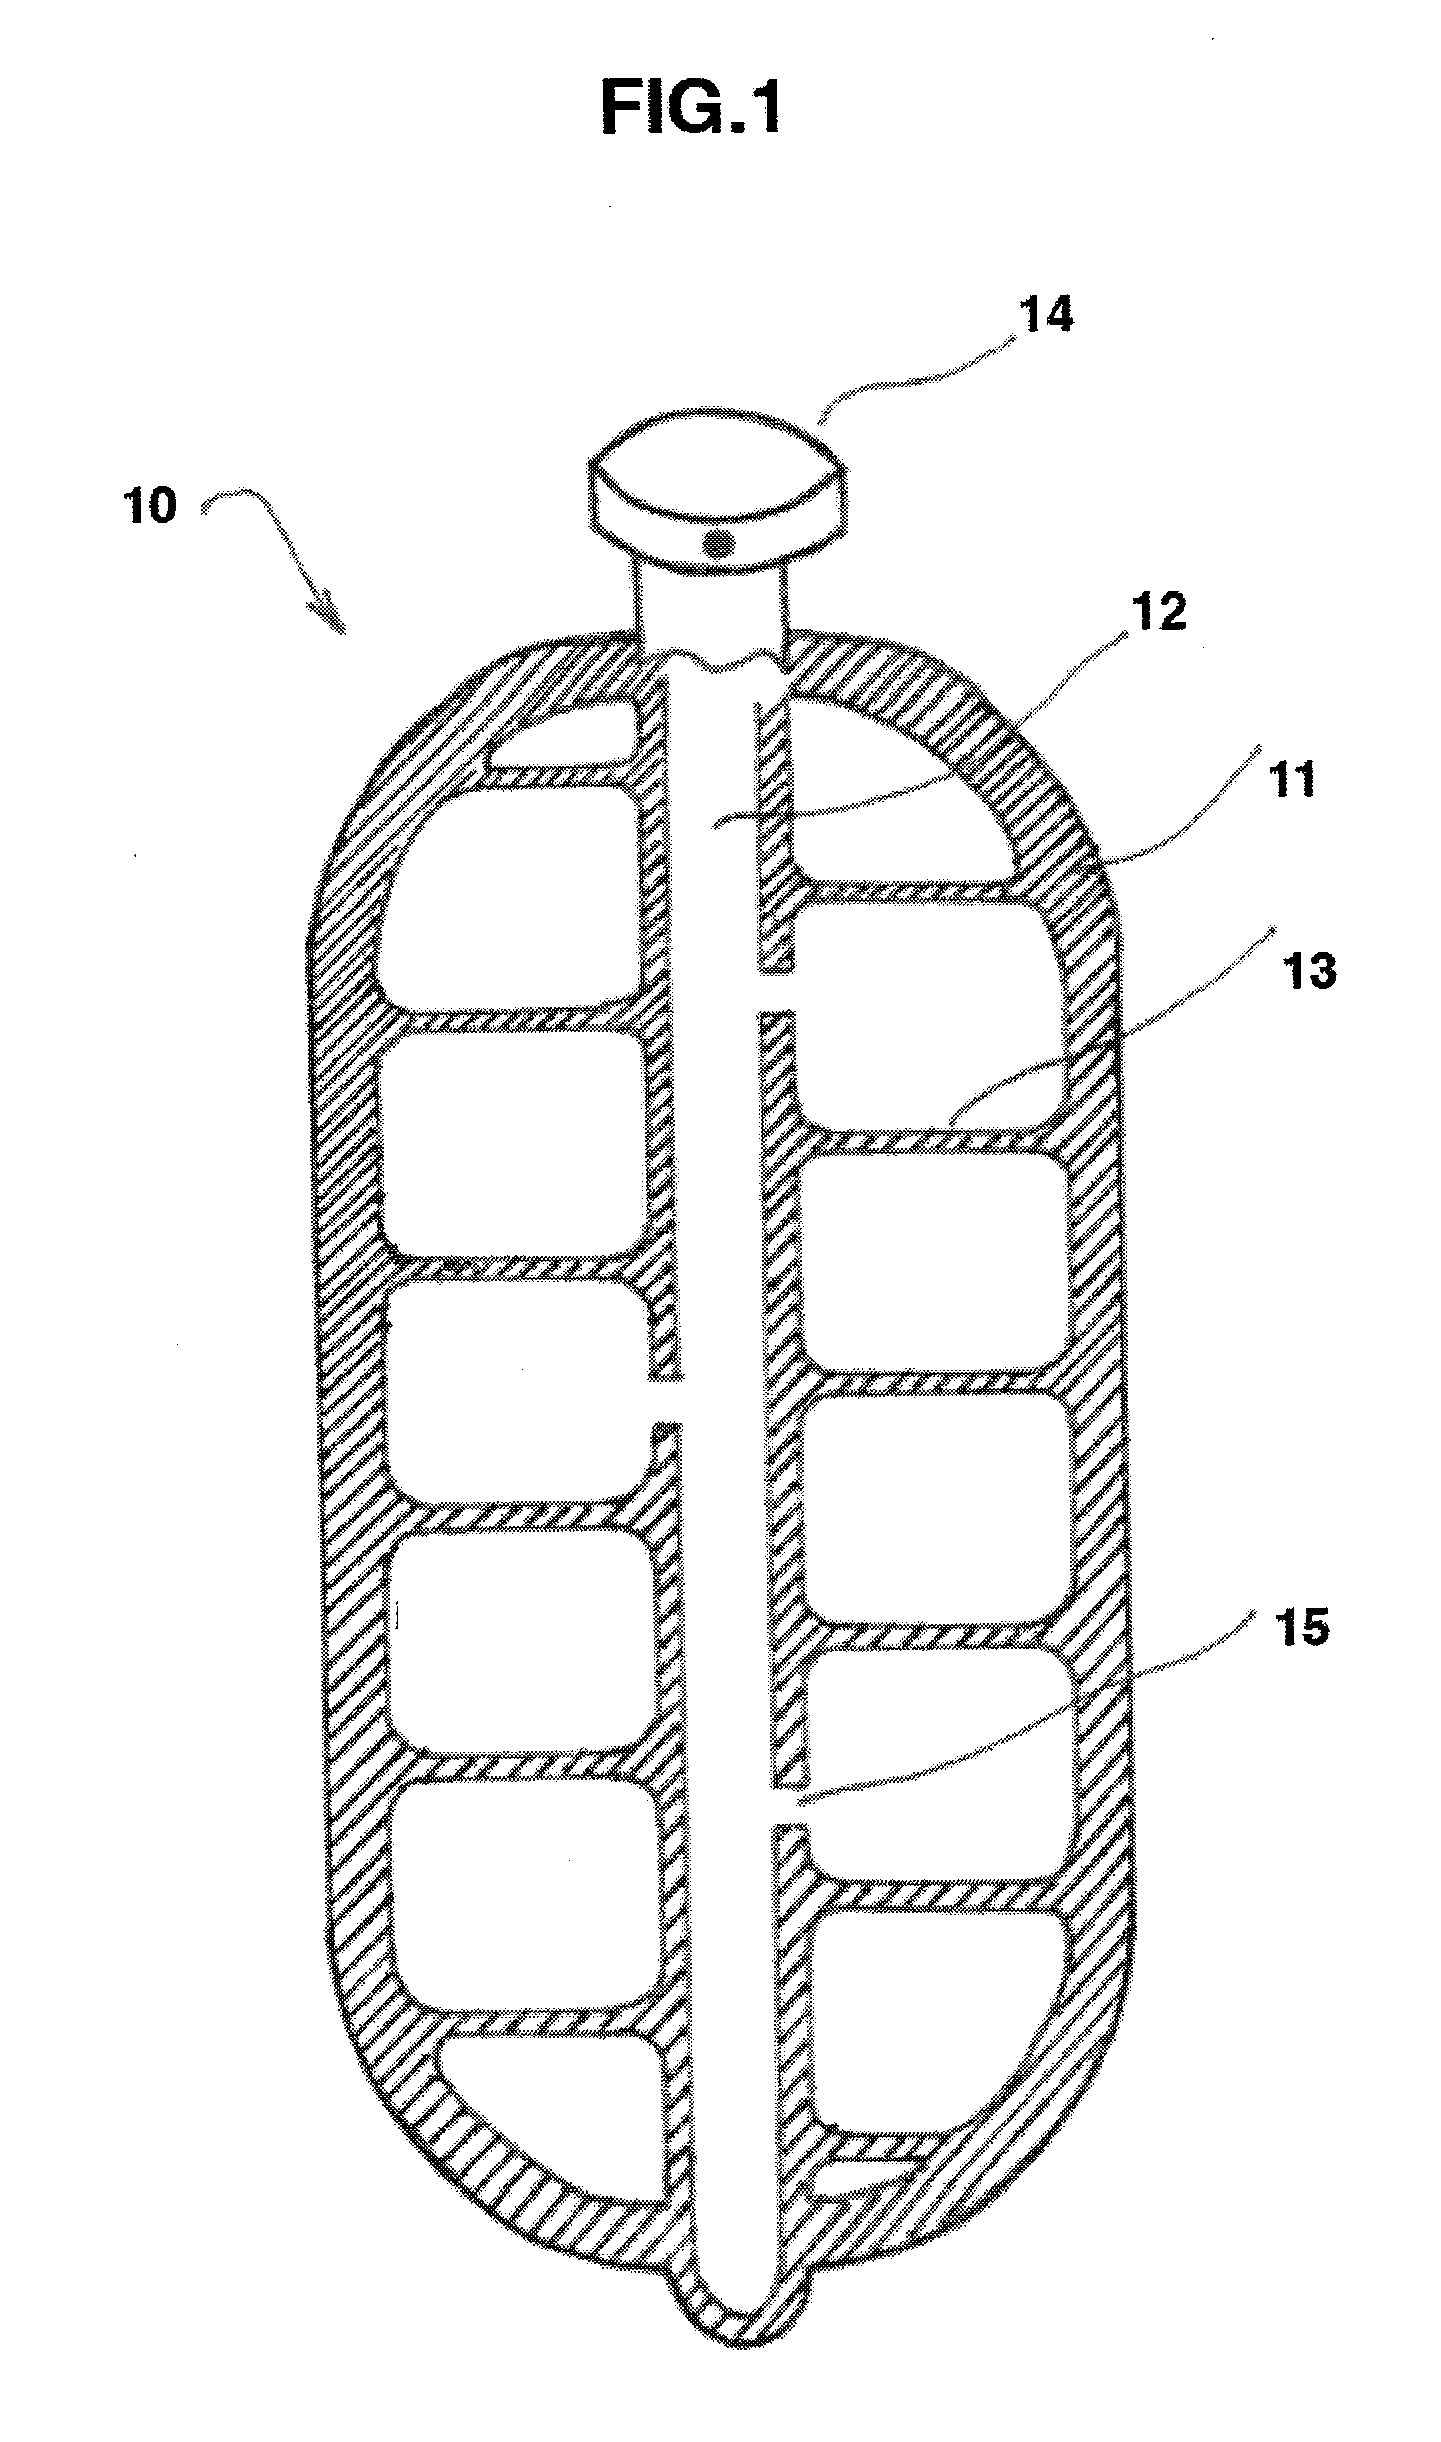 Pressure Vessels, Design and Method of Manufacturing Using Additive Printing